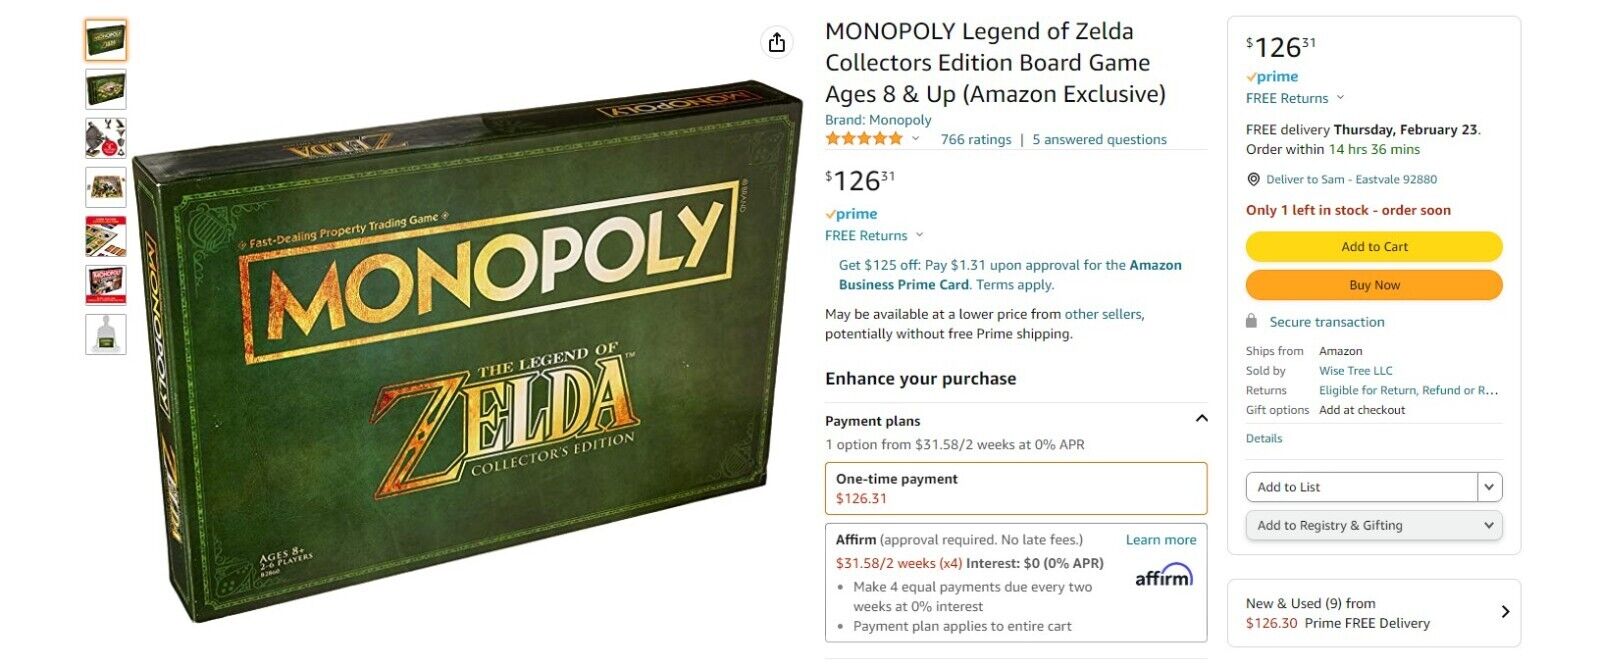 MONOPOLY Legend of Zelda Collectors Edition Board Game Ages 8 & Up New with Seal